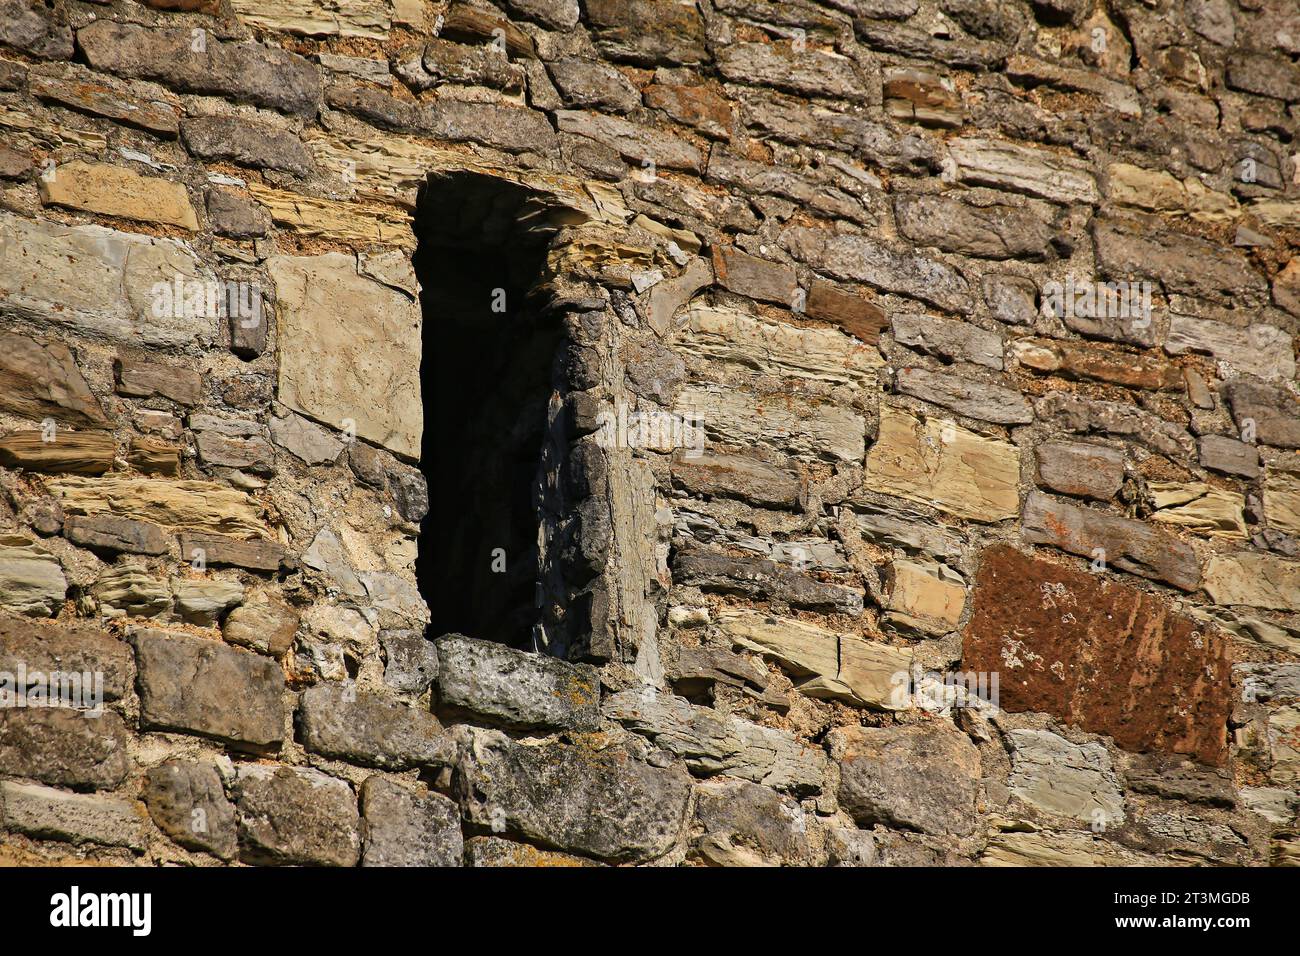 Loophole of a medieval watchtower in sunlight. Stock Photo